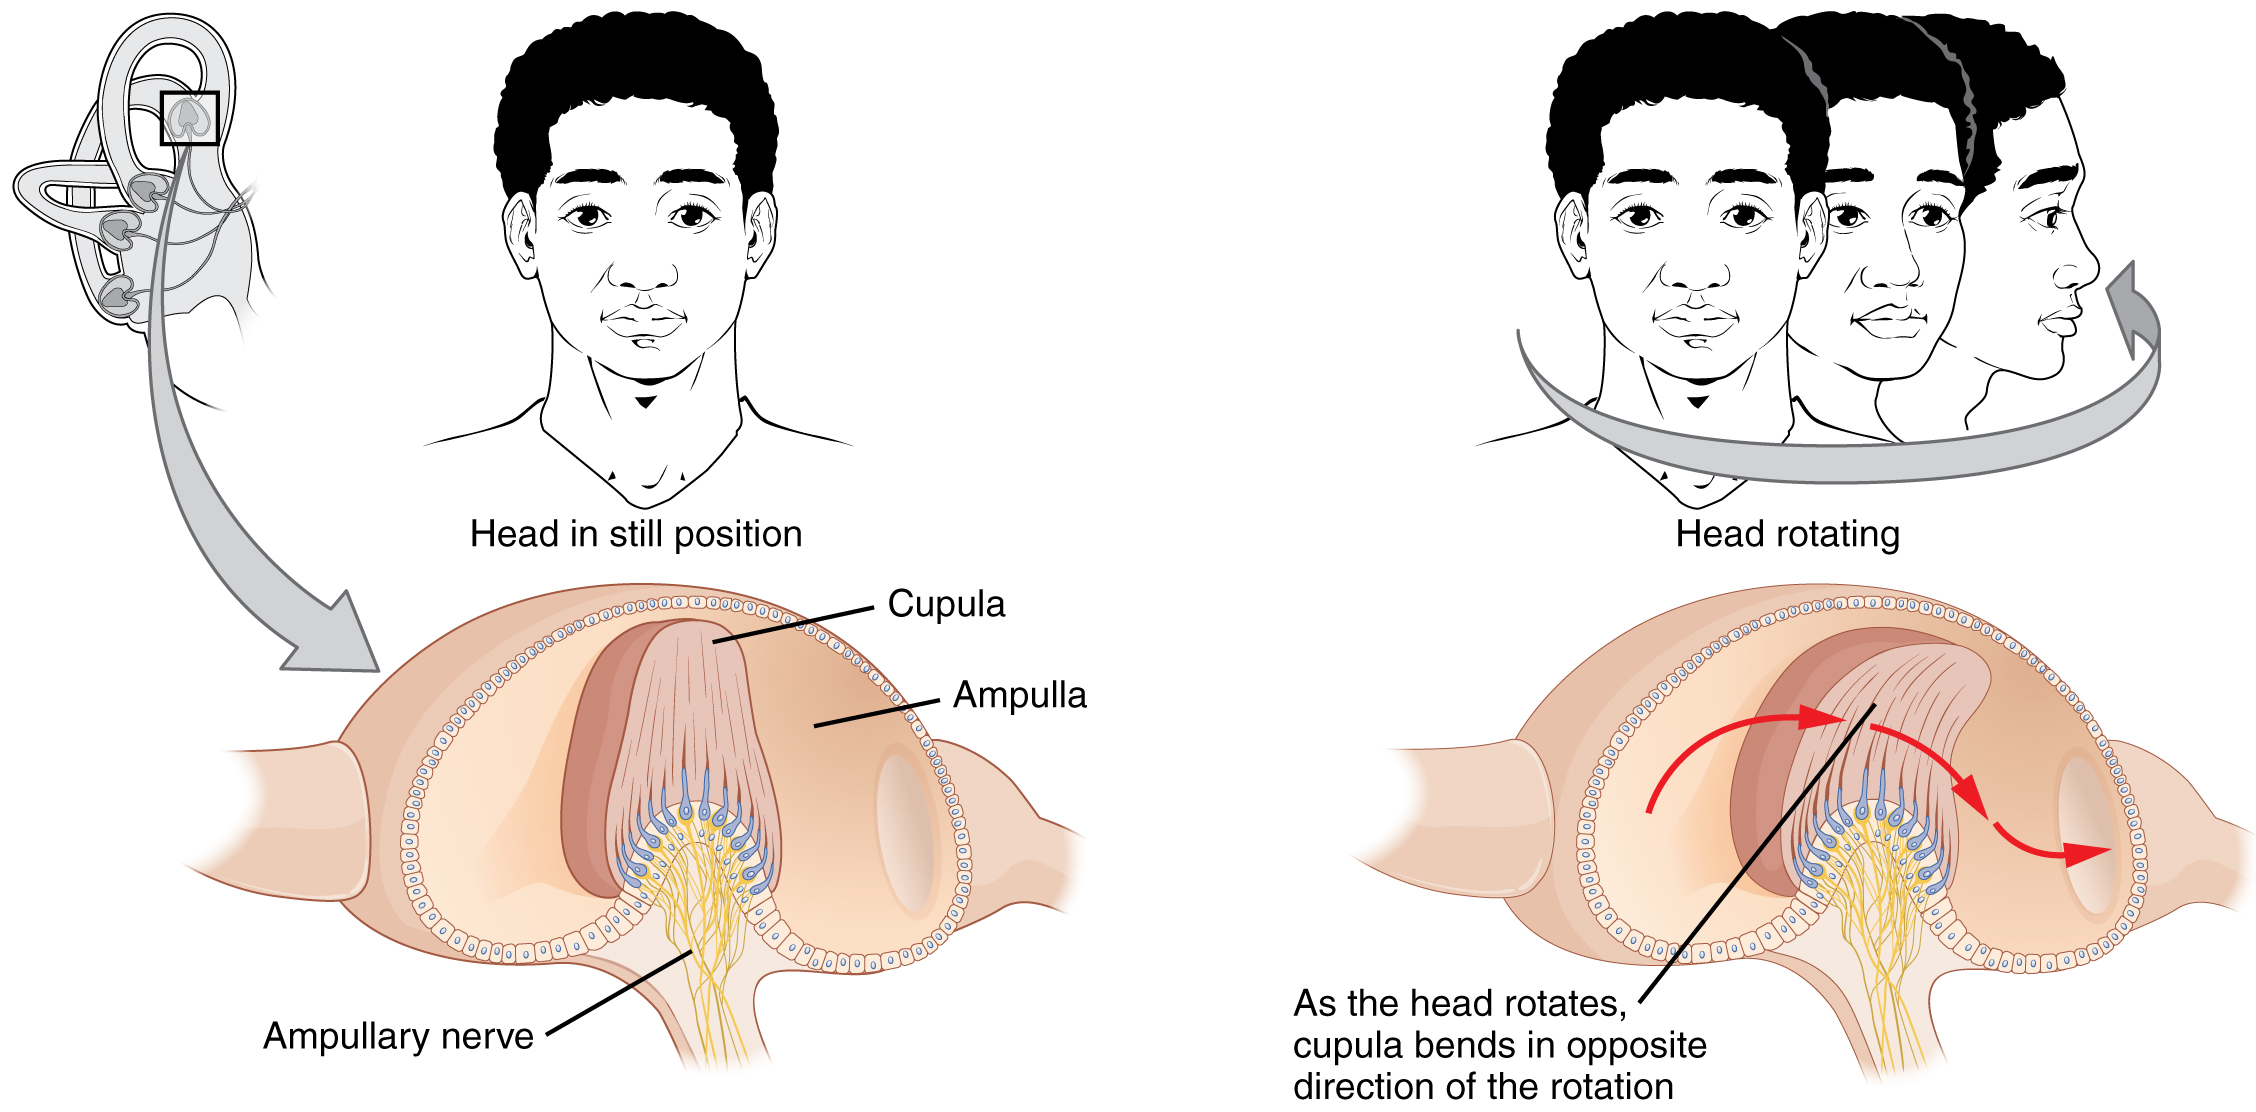 The left panel of this image shows a person’s head in a still position. Underneath this, the ampullary nerve is shown. Labels read: cupula, ampulla, ampullary nerve). The right panel shows a person rotating his head, and the below that, the direction of movement of the cupula is shown. Label reads: as the head rotates, cupula bends in opposite direction of the rotation.